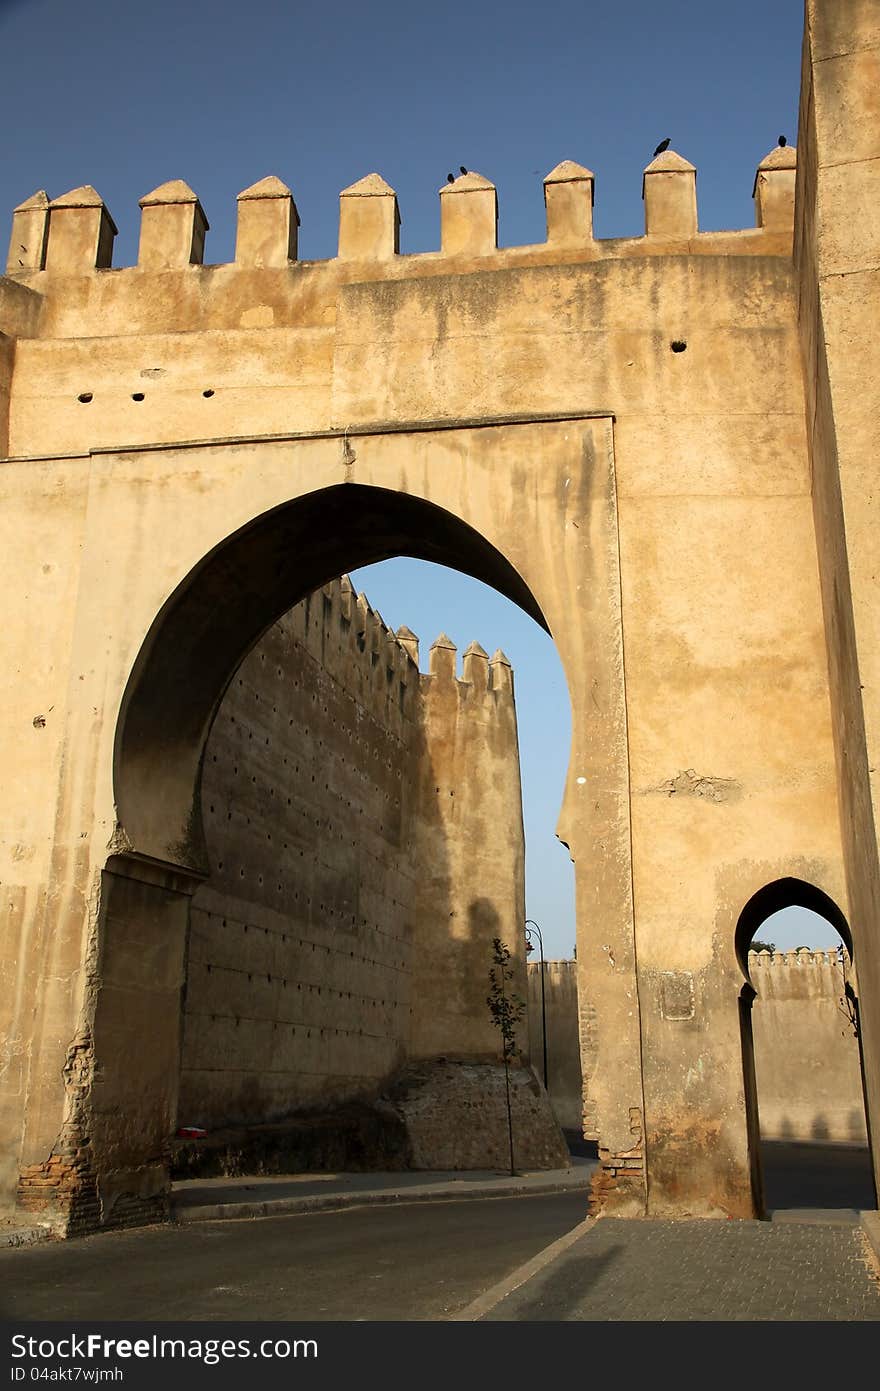 Gate to the old city of Fes, Morocco